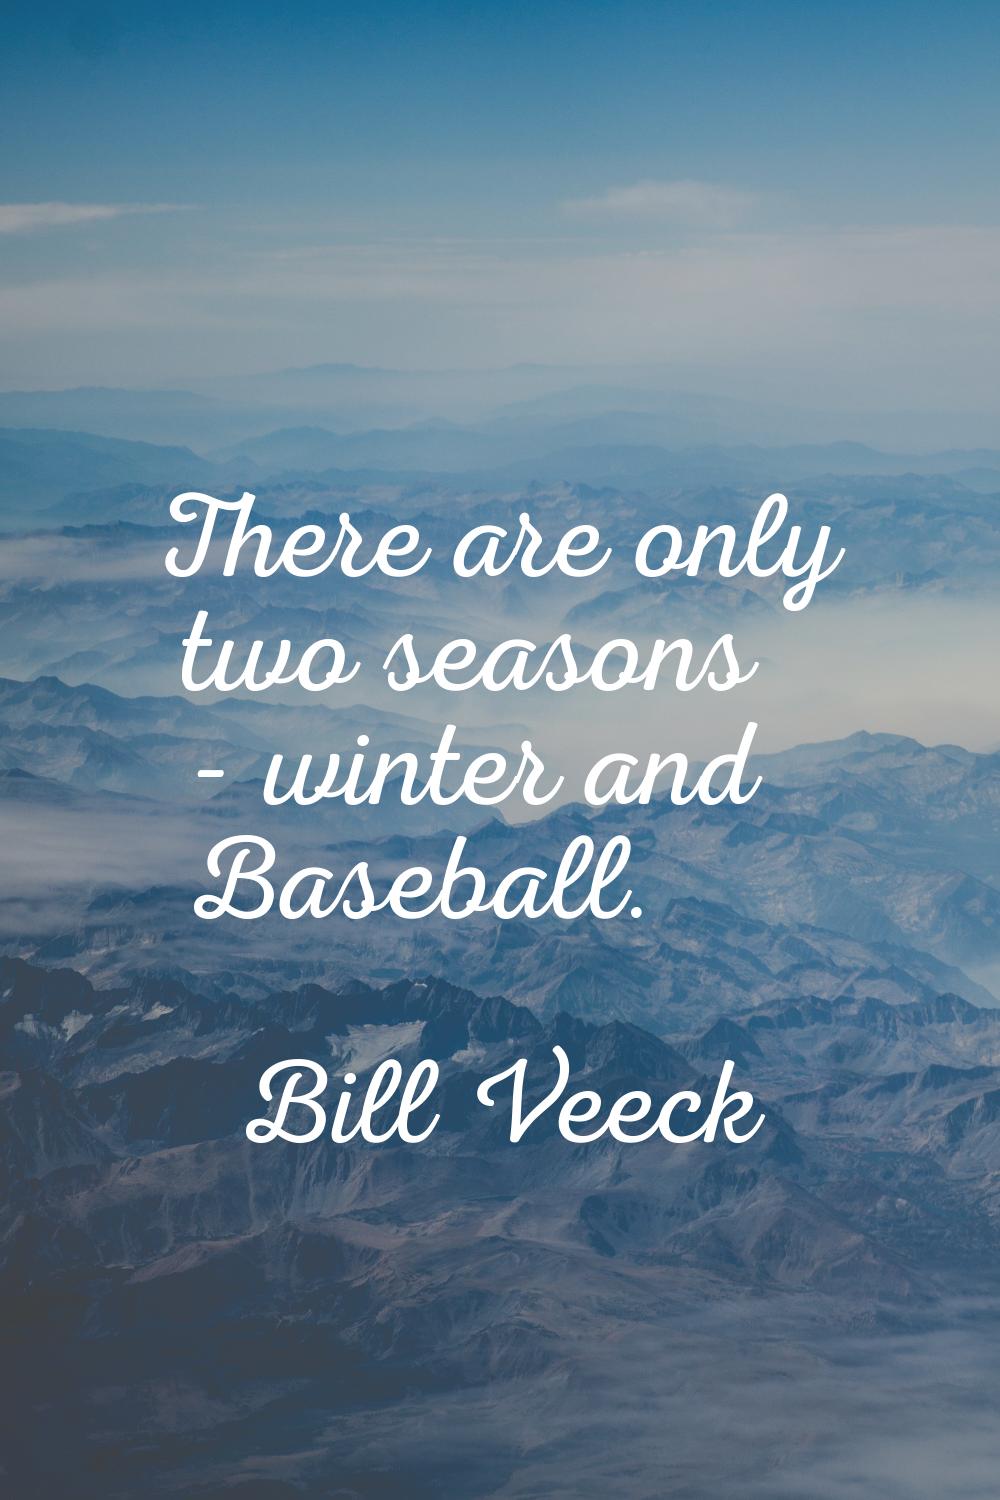 There are only two seasons - winter and Baseball.